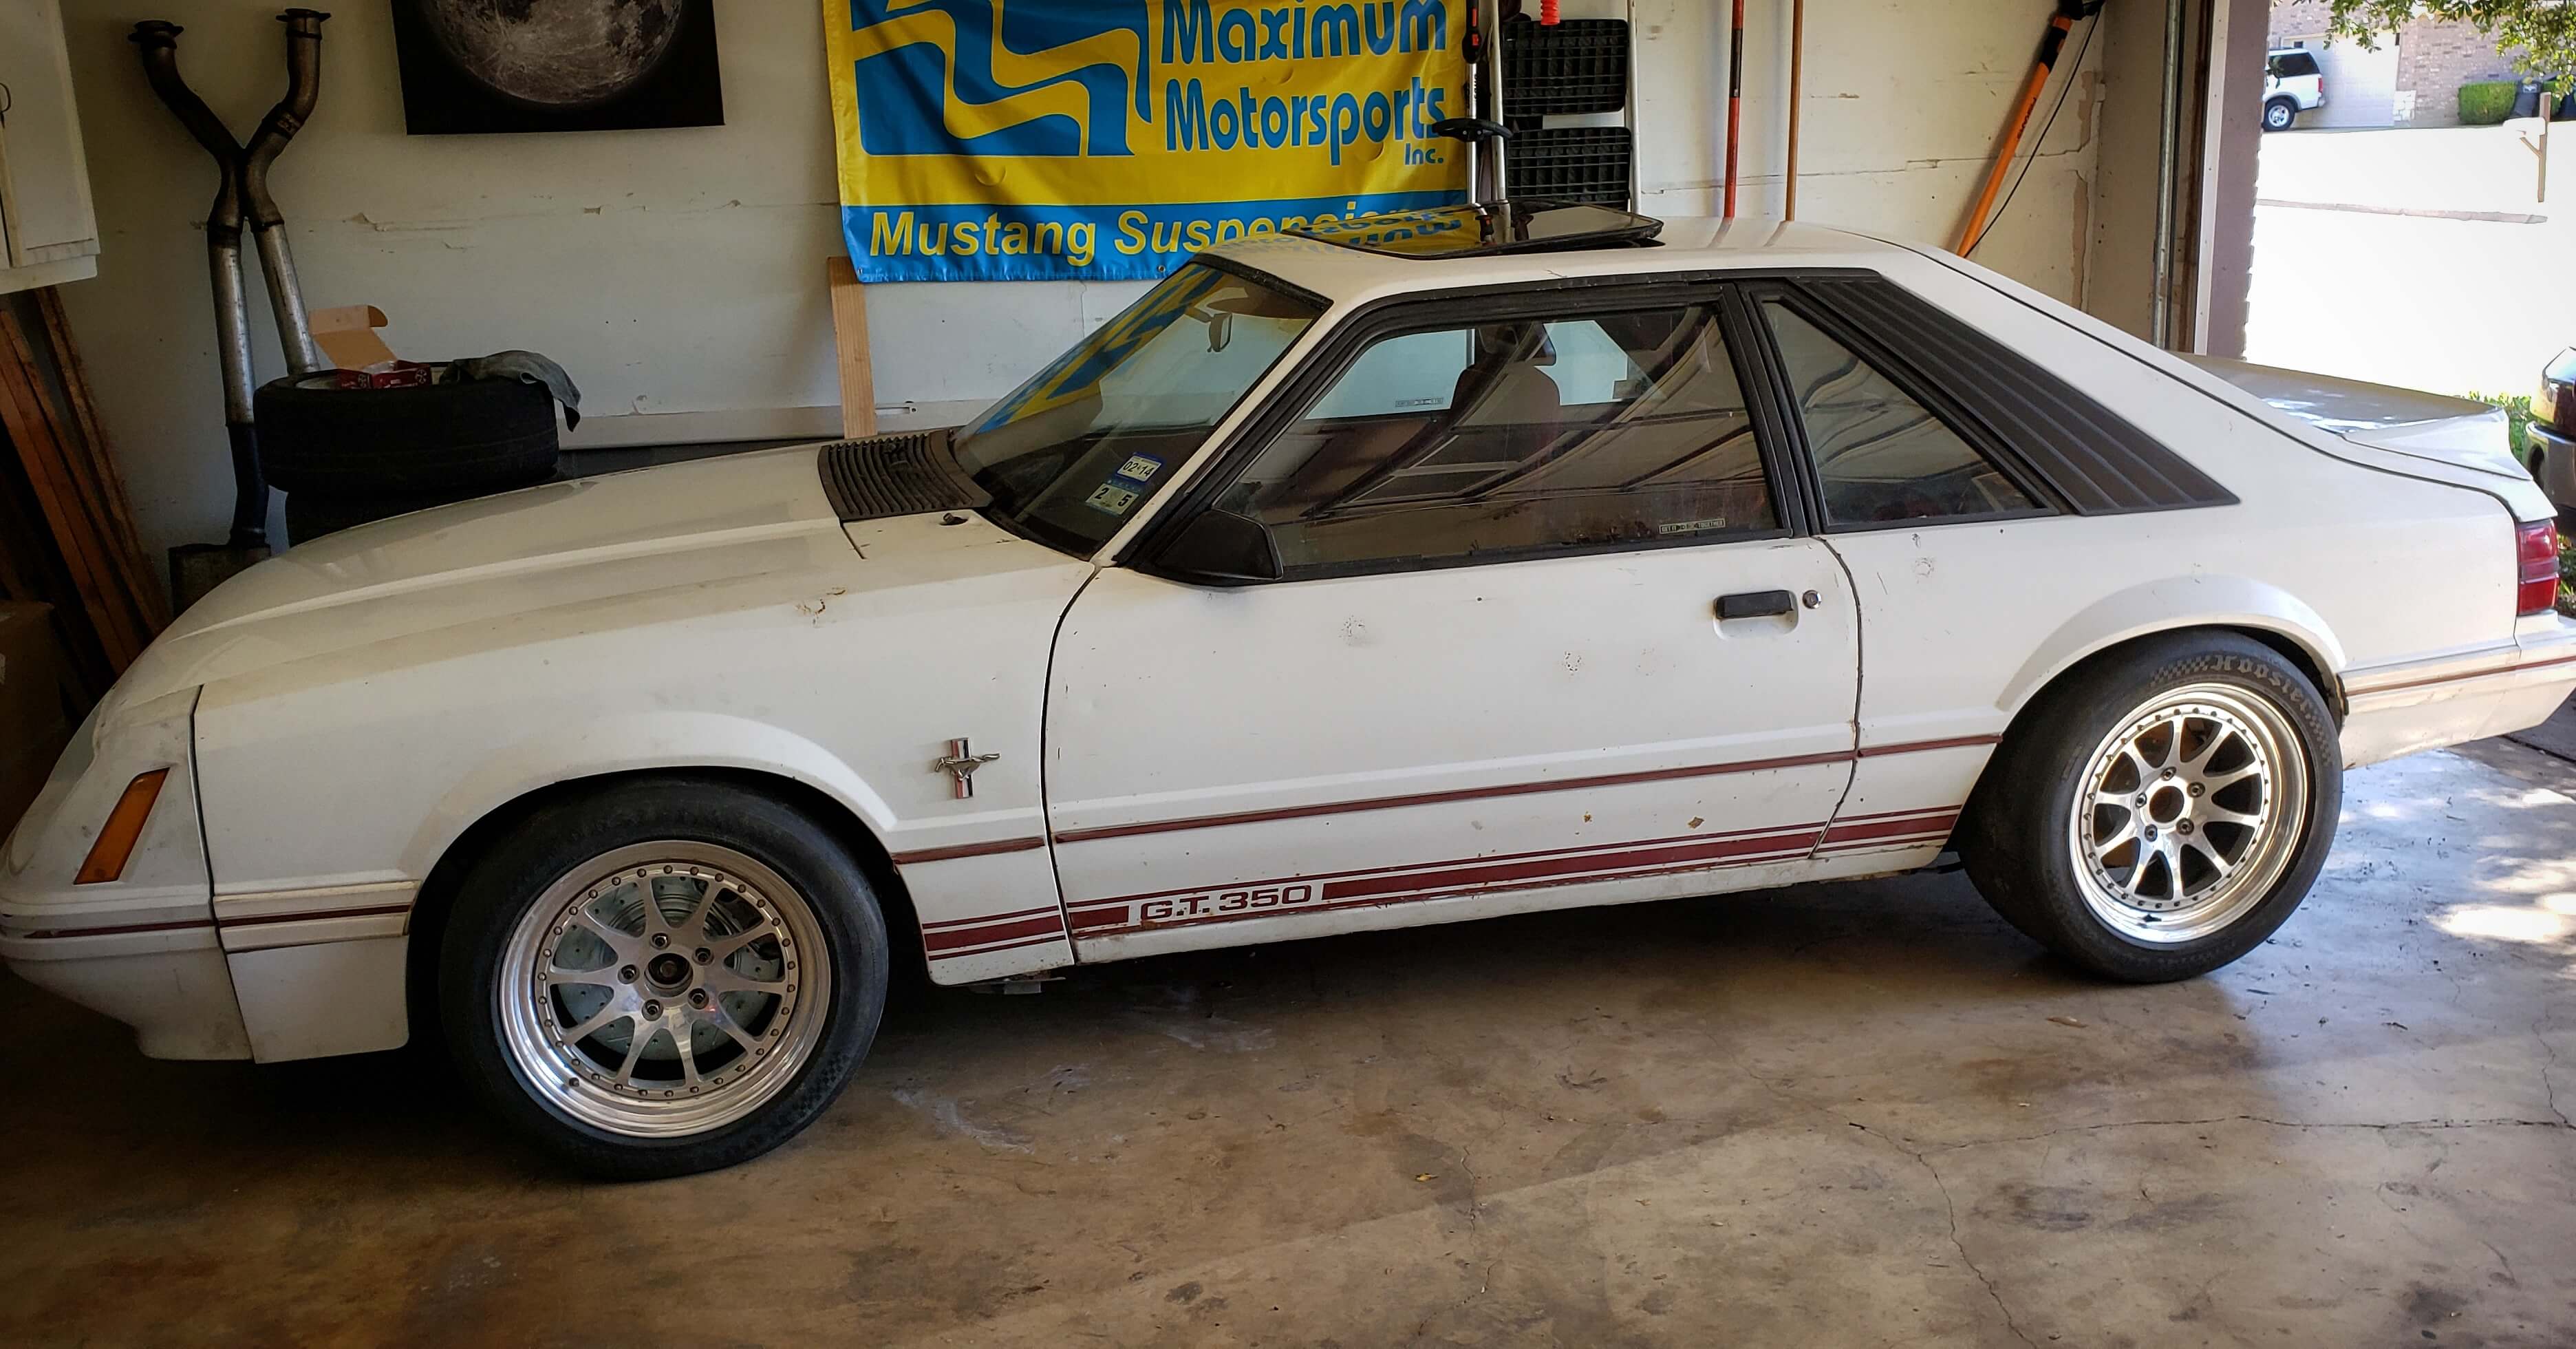 Nathan S 1984 Ford Mustang Holley My Garage